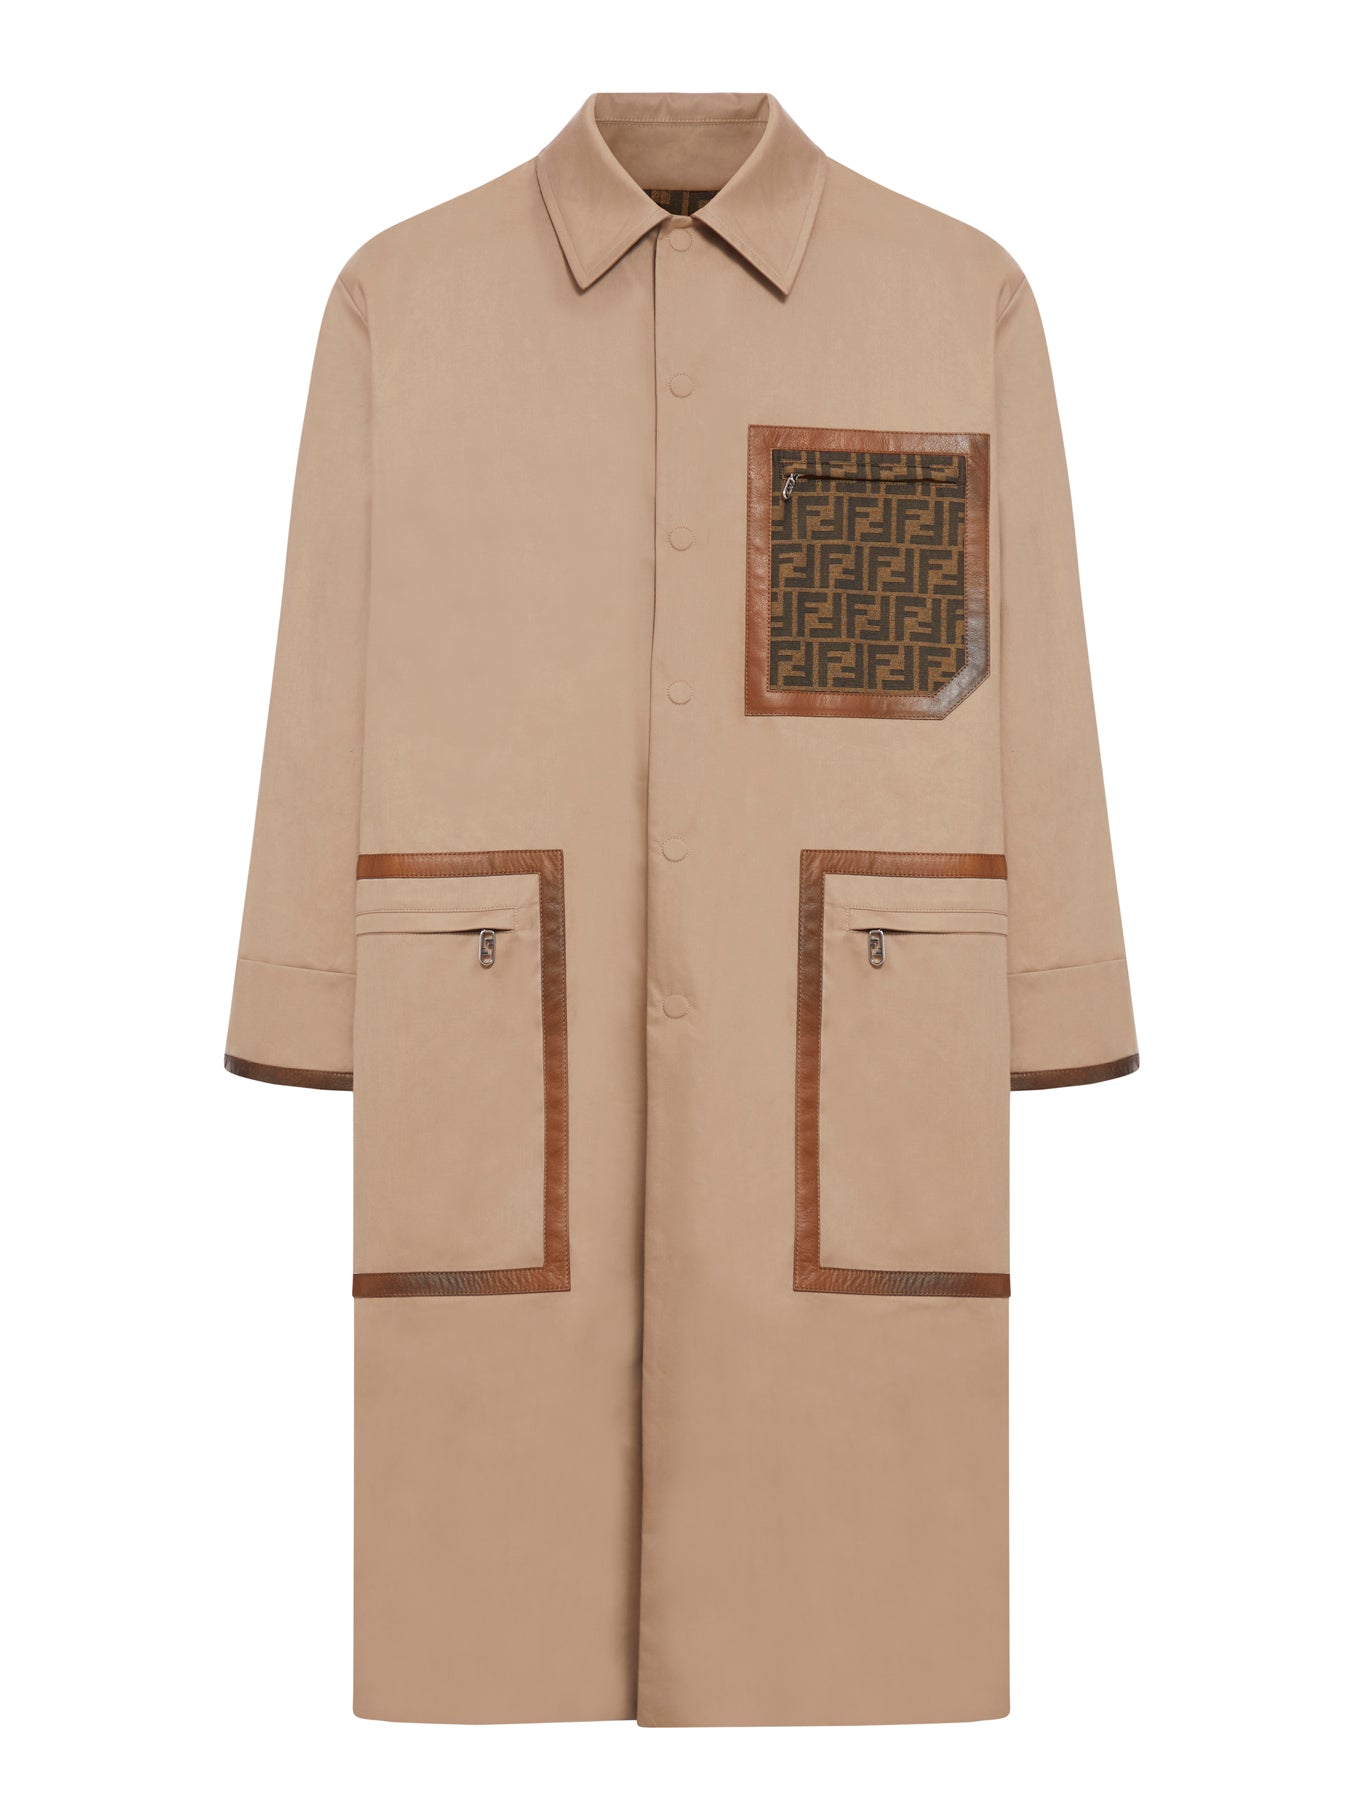 trench coat in brown fabric